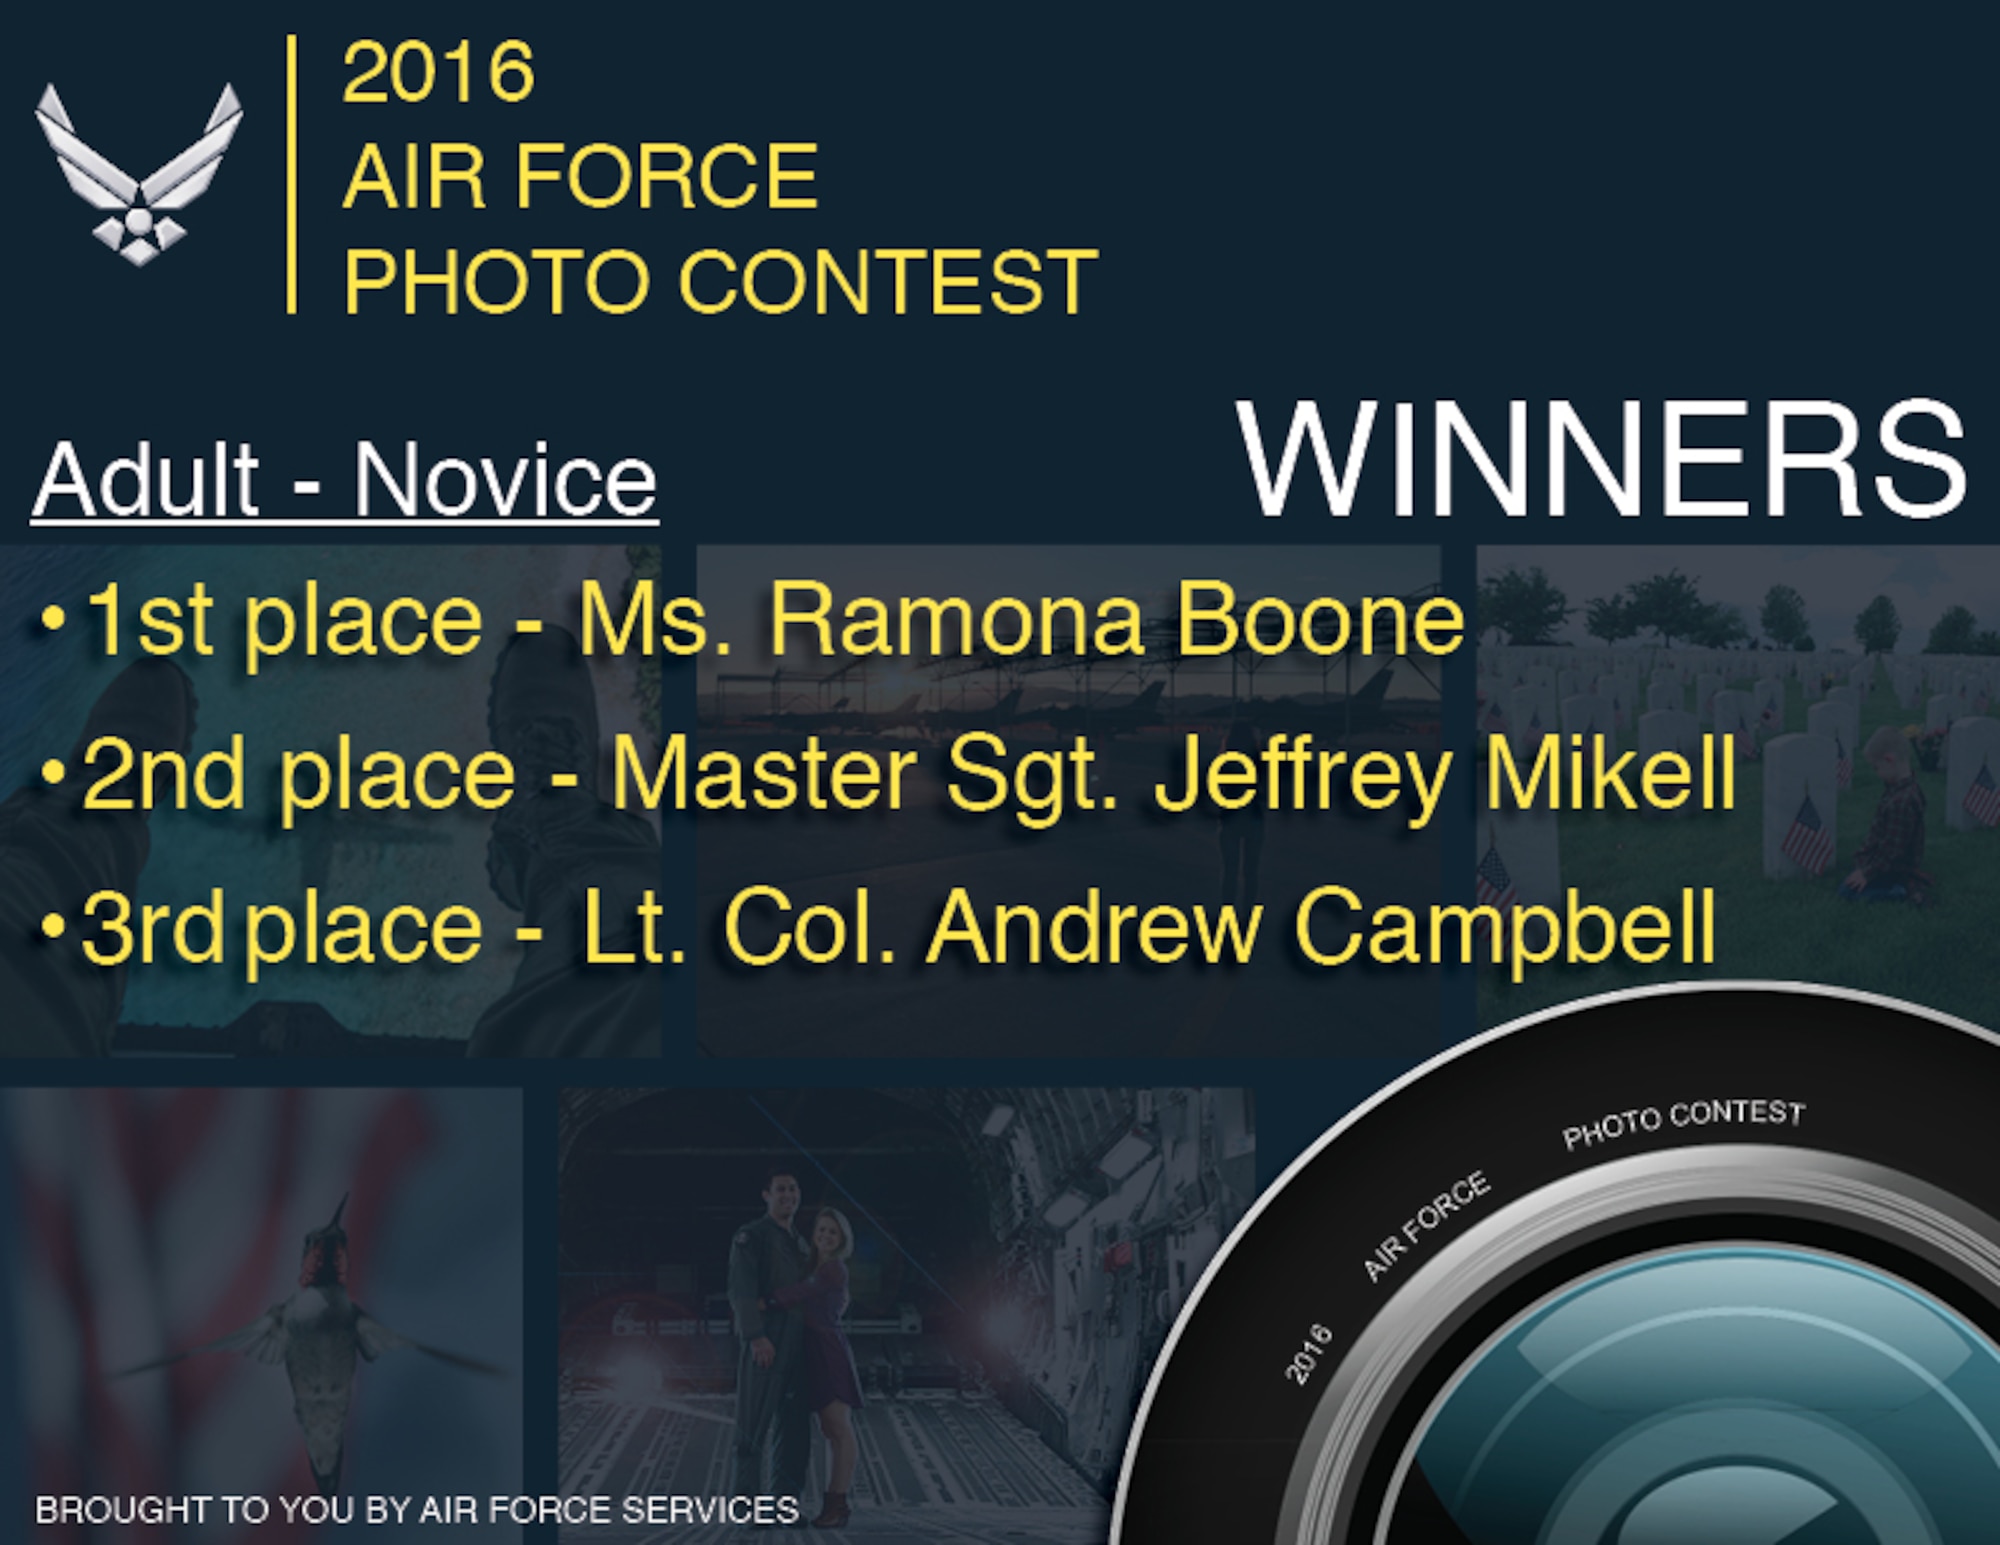 2016 Air Force Photo Contest Winners adult novice